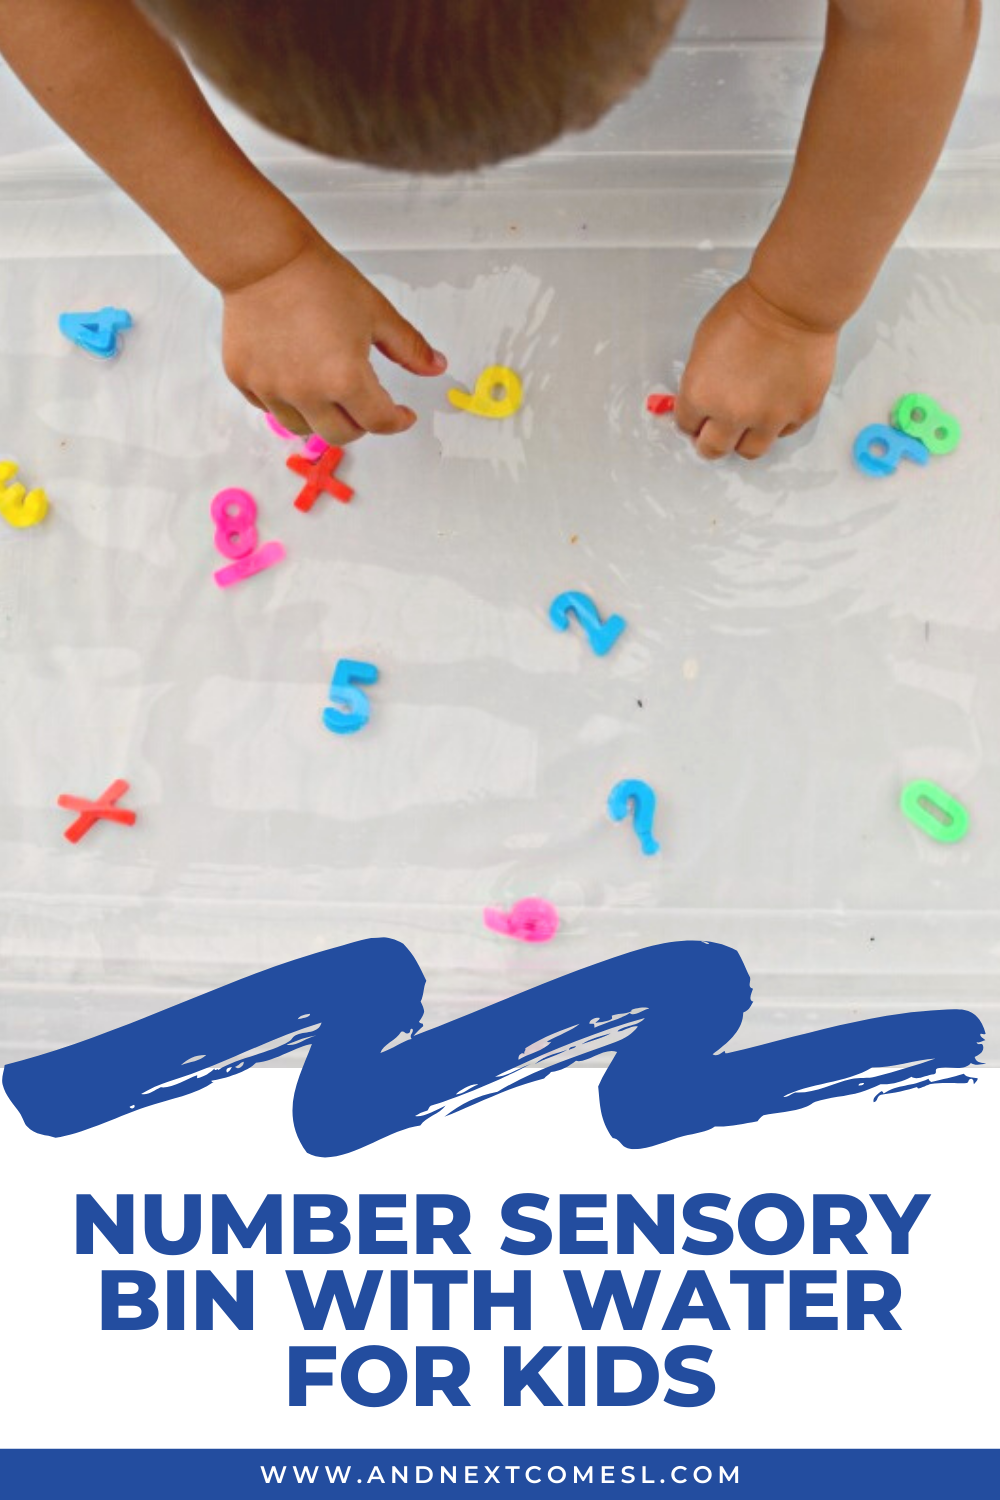 Number sensory bin idea - Your toddlers and preschoolers will love fishing for numbers with this fun water math activity!